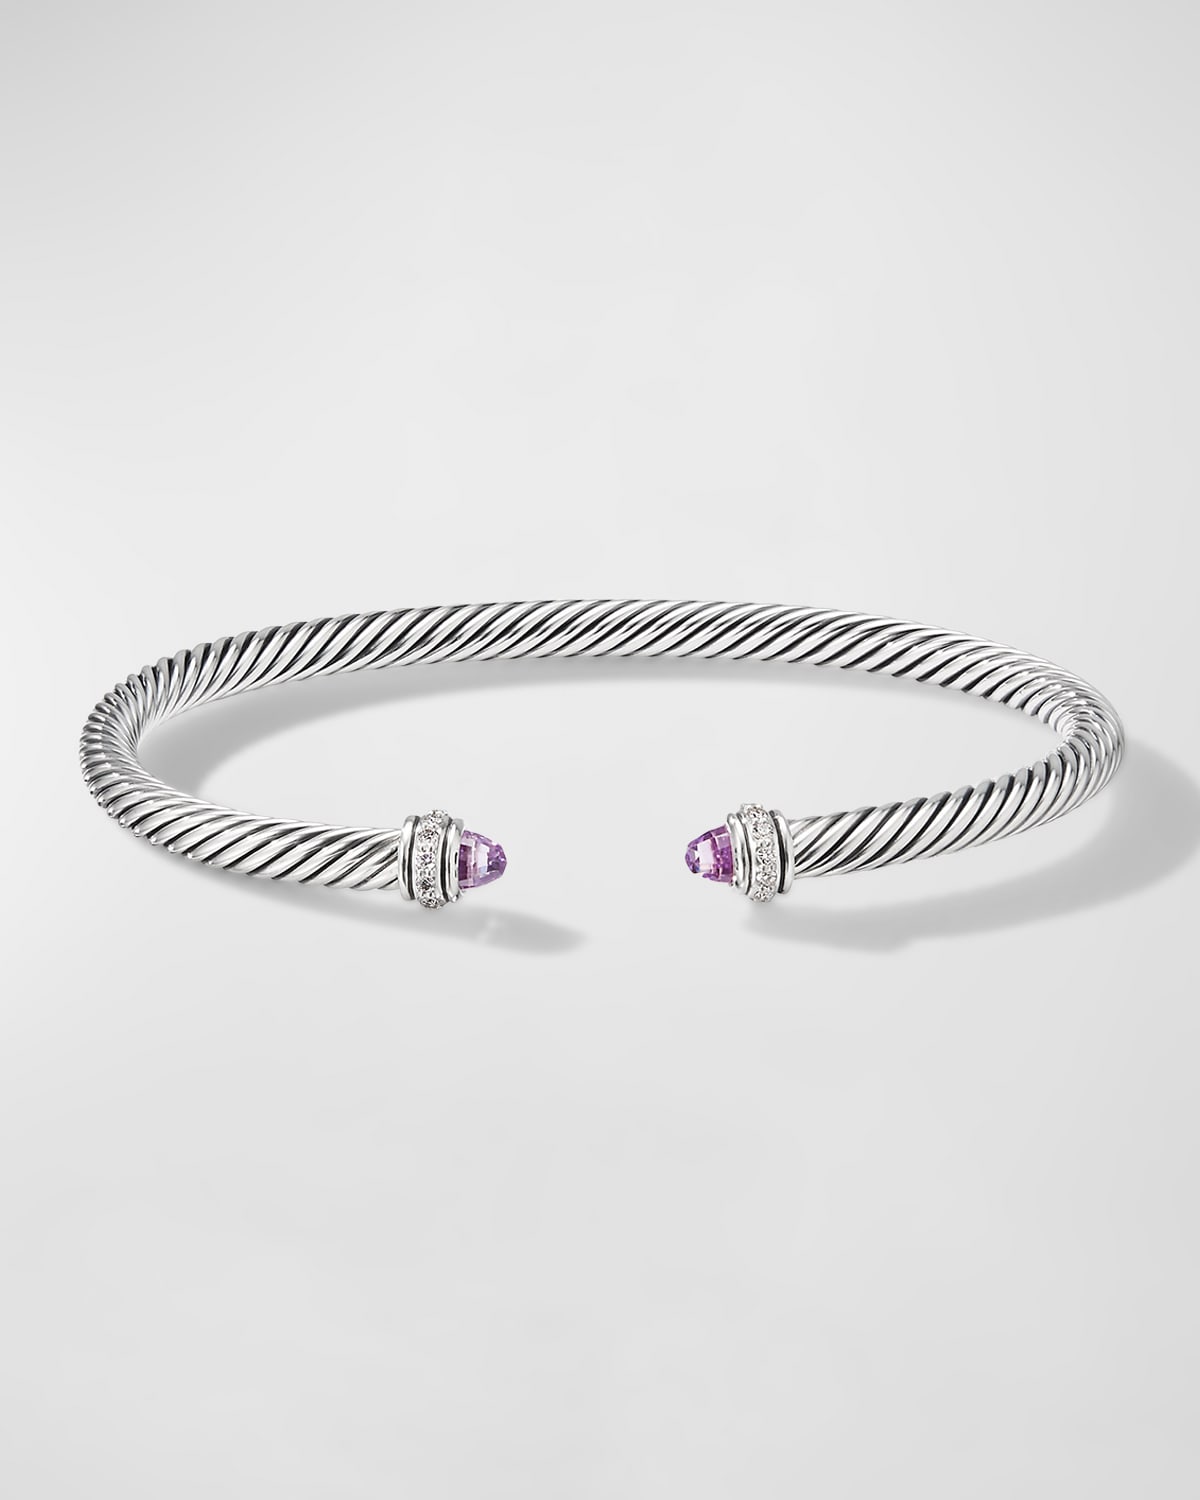 DAVID YURMAN CABLE BRACELET WITH GEMSTONE AND DIAMONDS IN SILVER, 4MM,PROD221930162